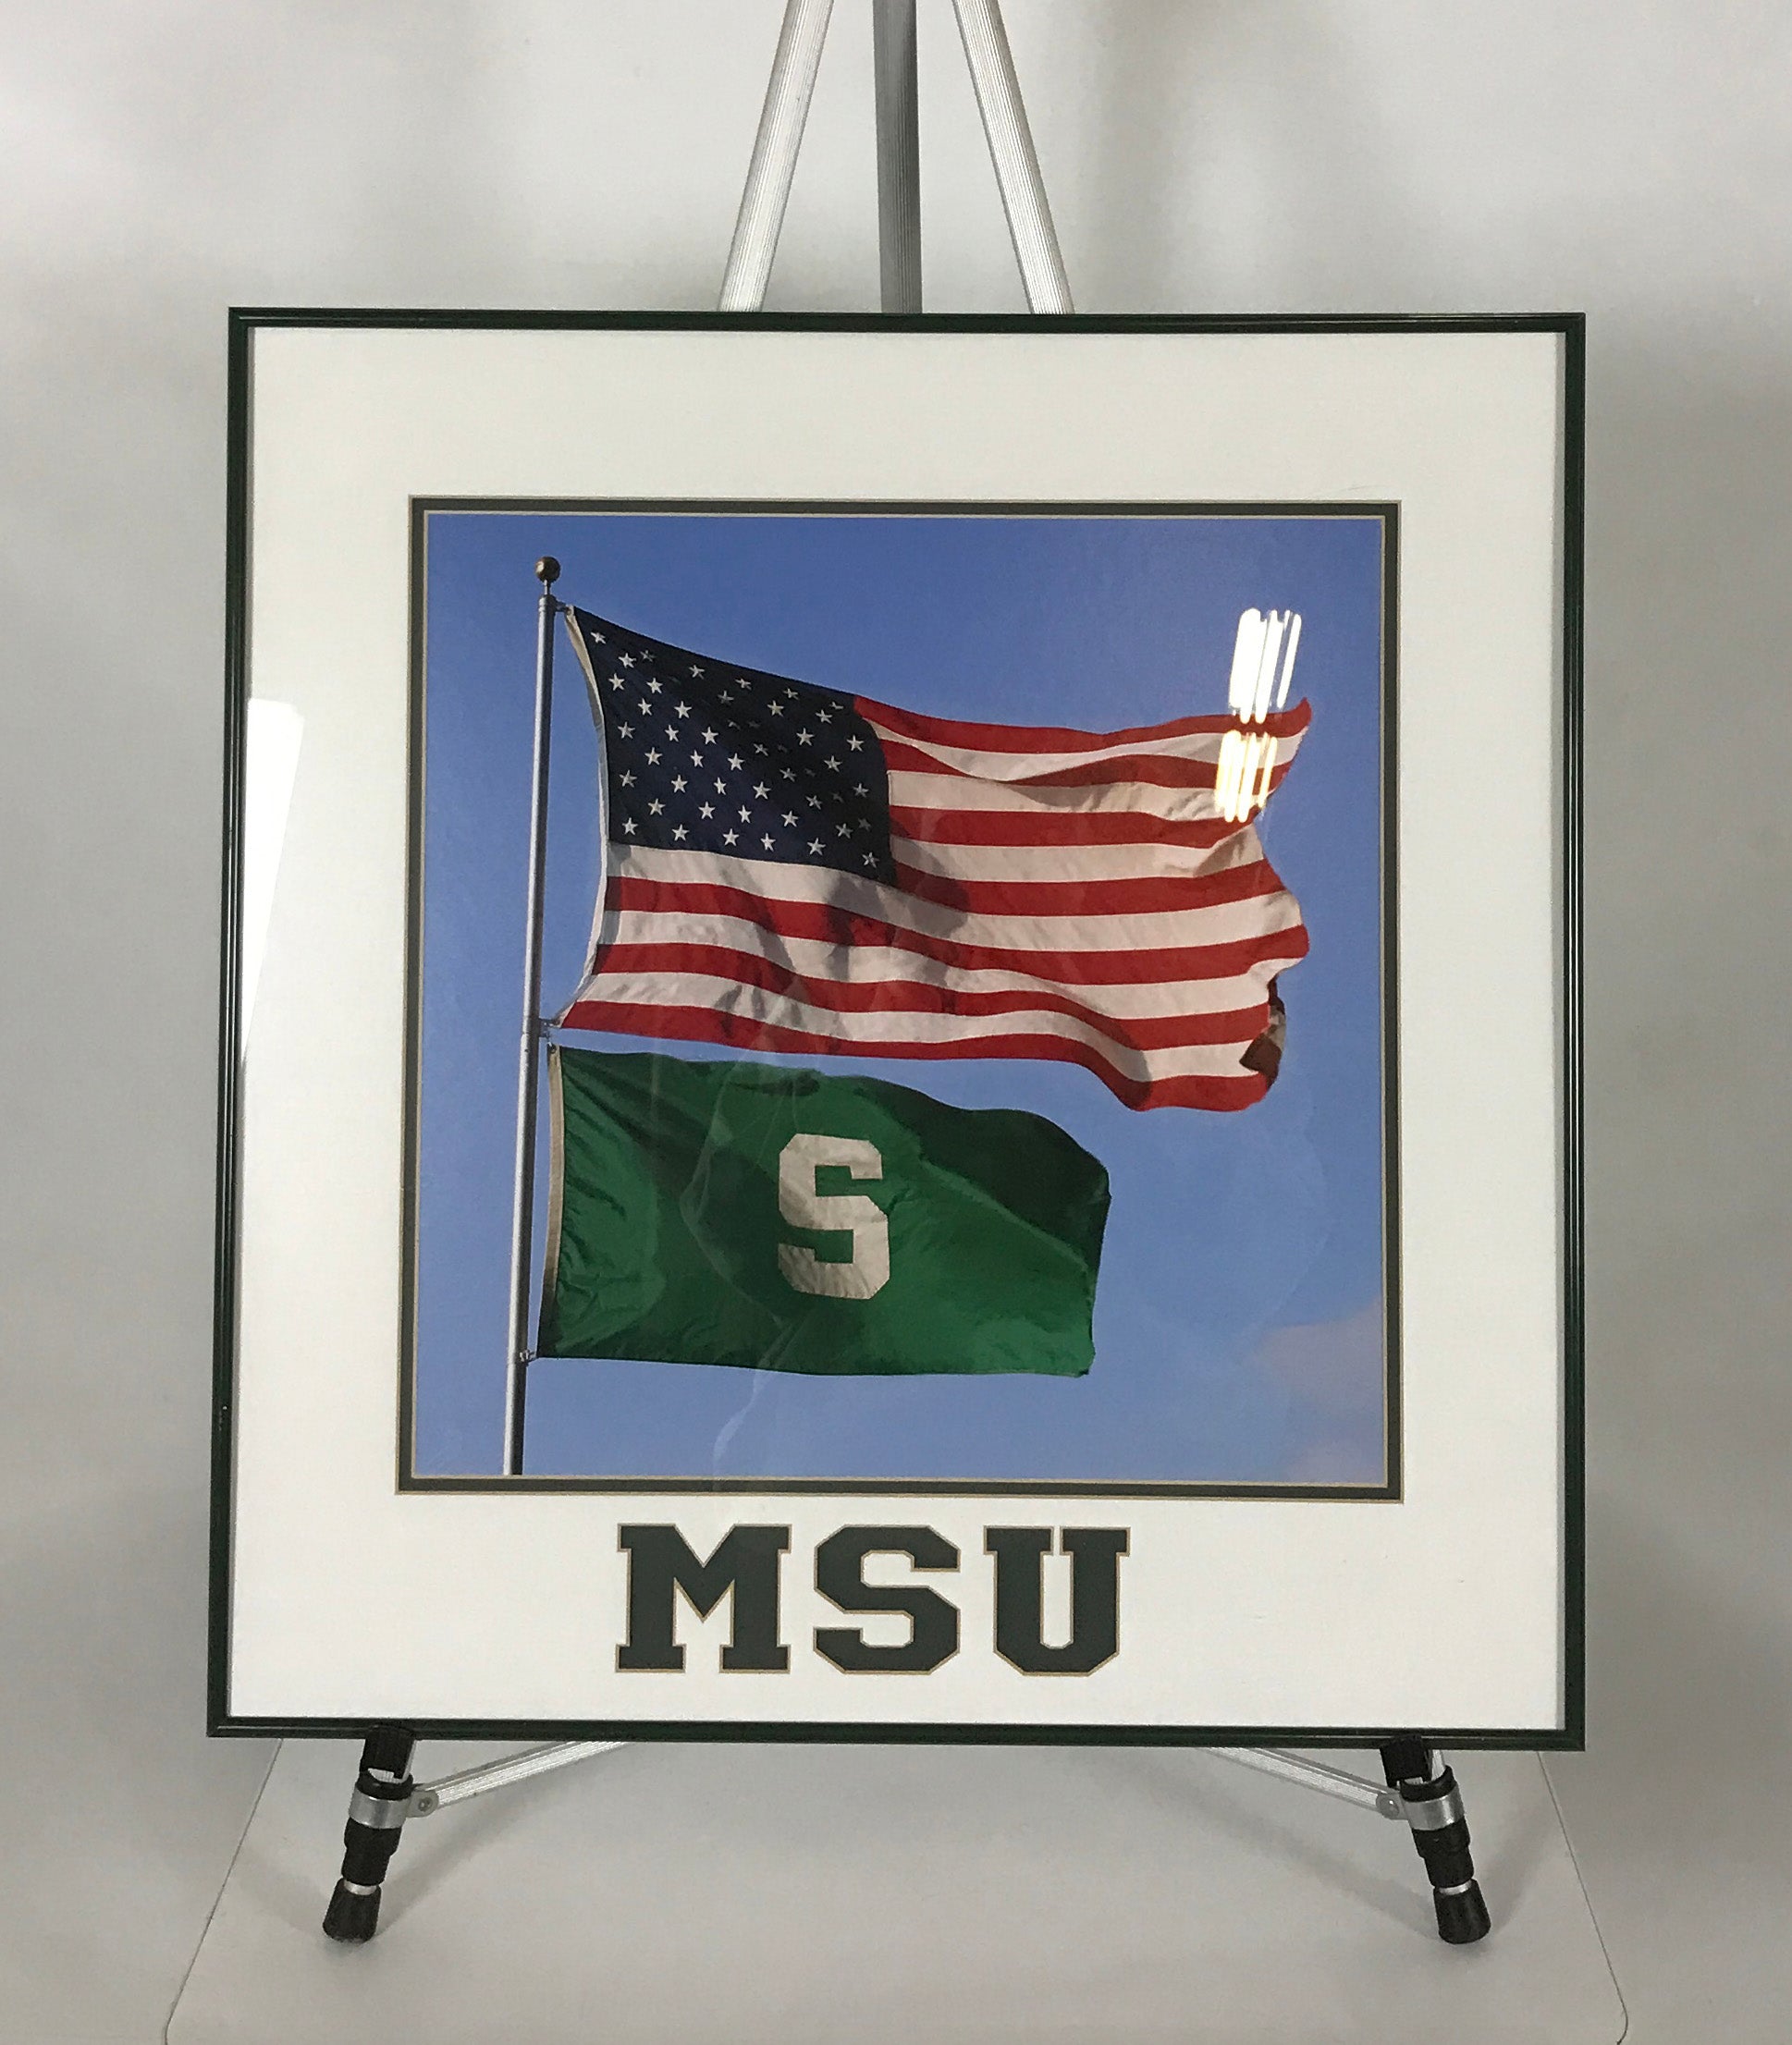 Framed Photo of MSU and U.S. Flags